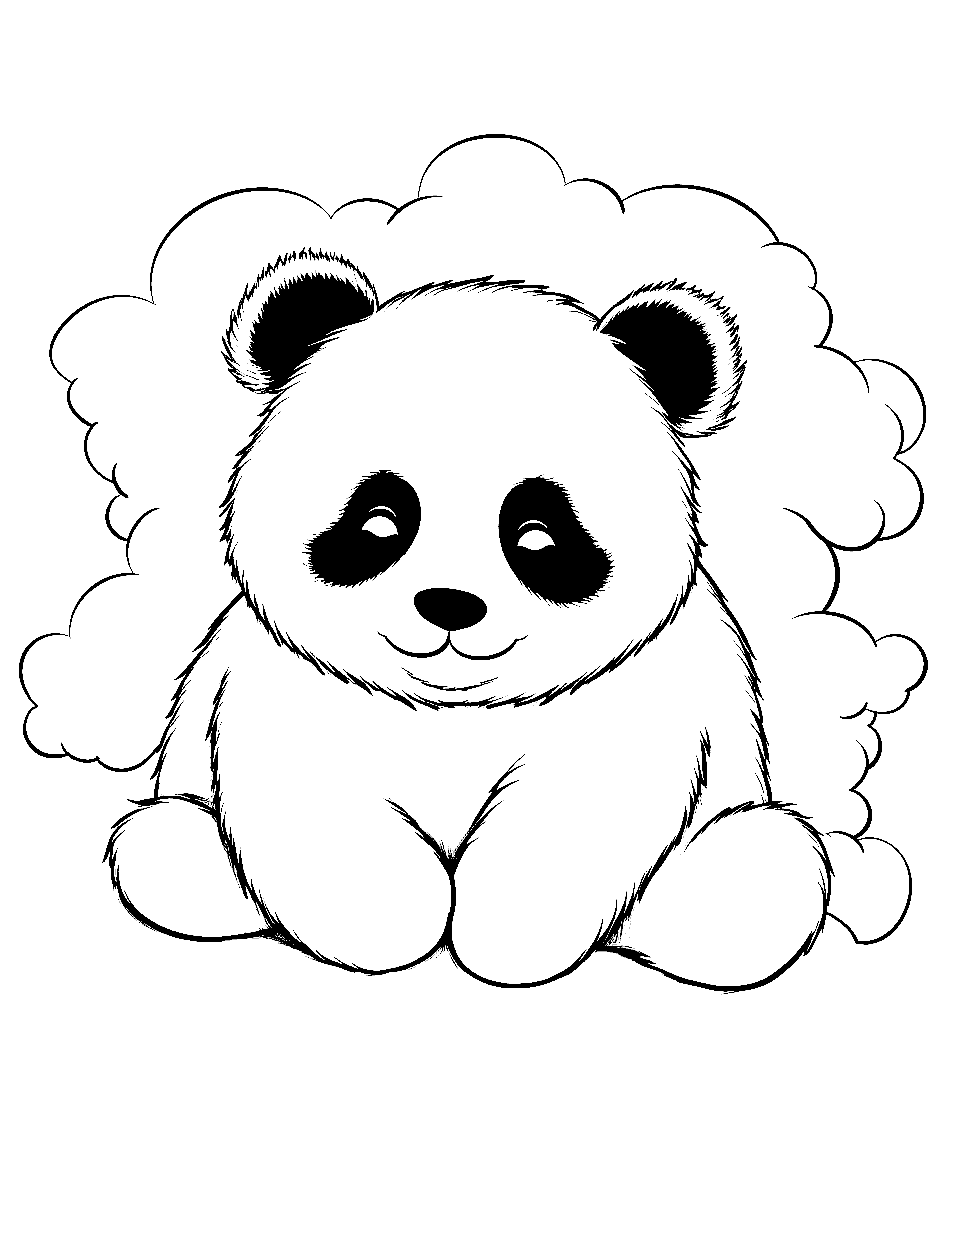 Sleeping Panda on a Cloud Coloring Page - A peaceful scene with a panda sleeping soundly on a fluffy cloud.